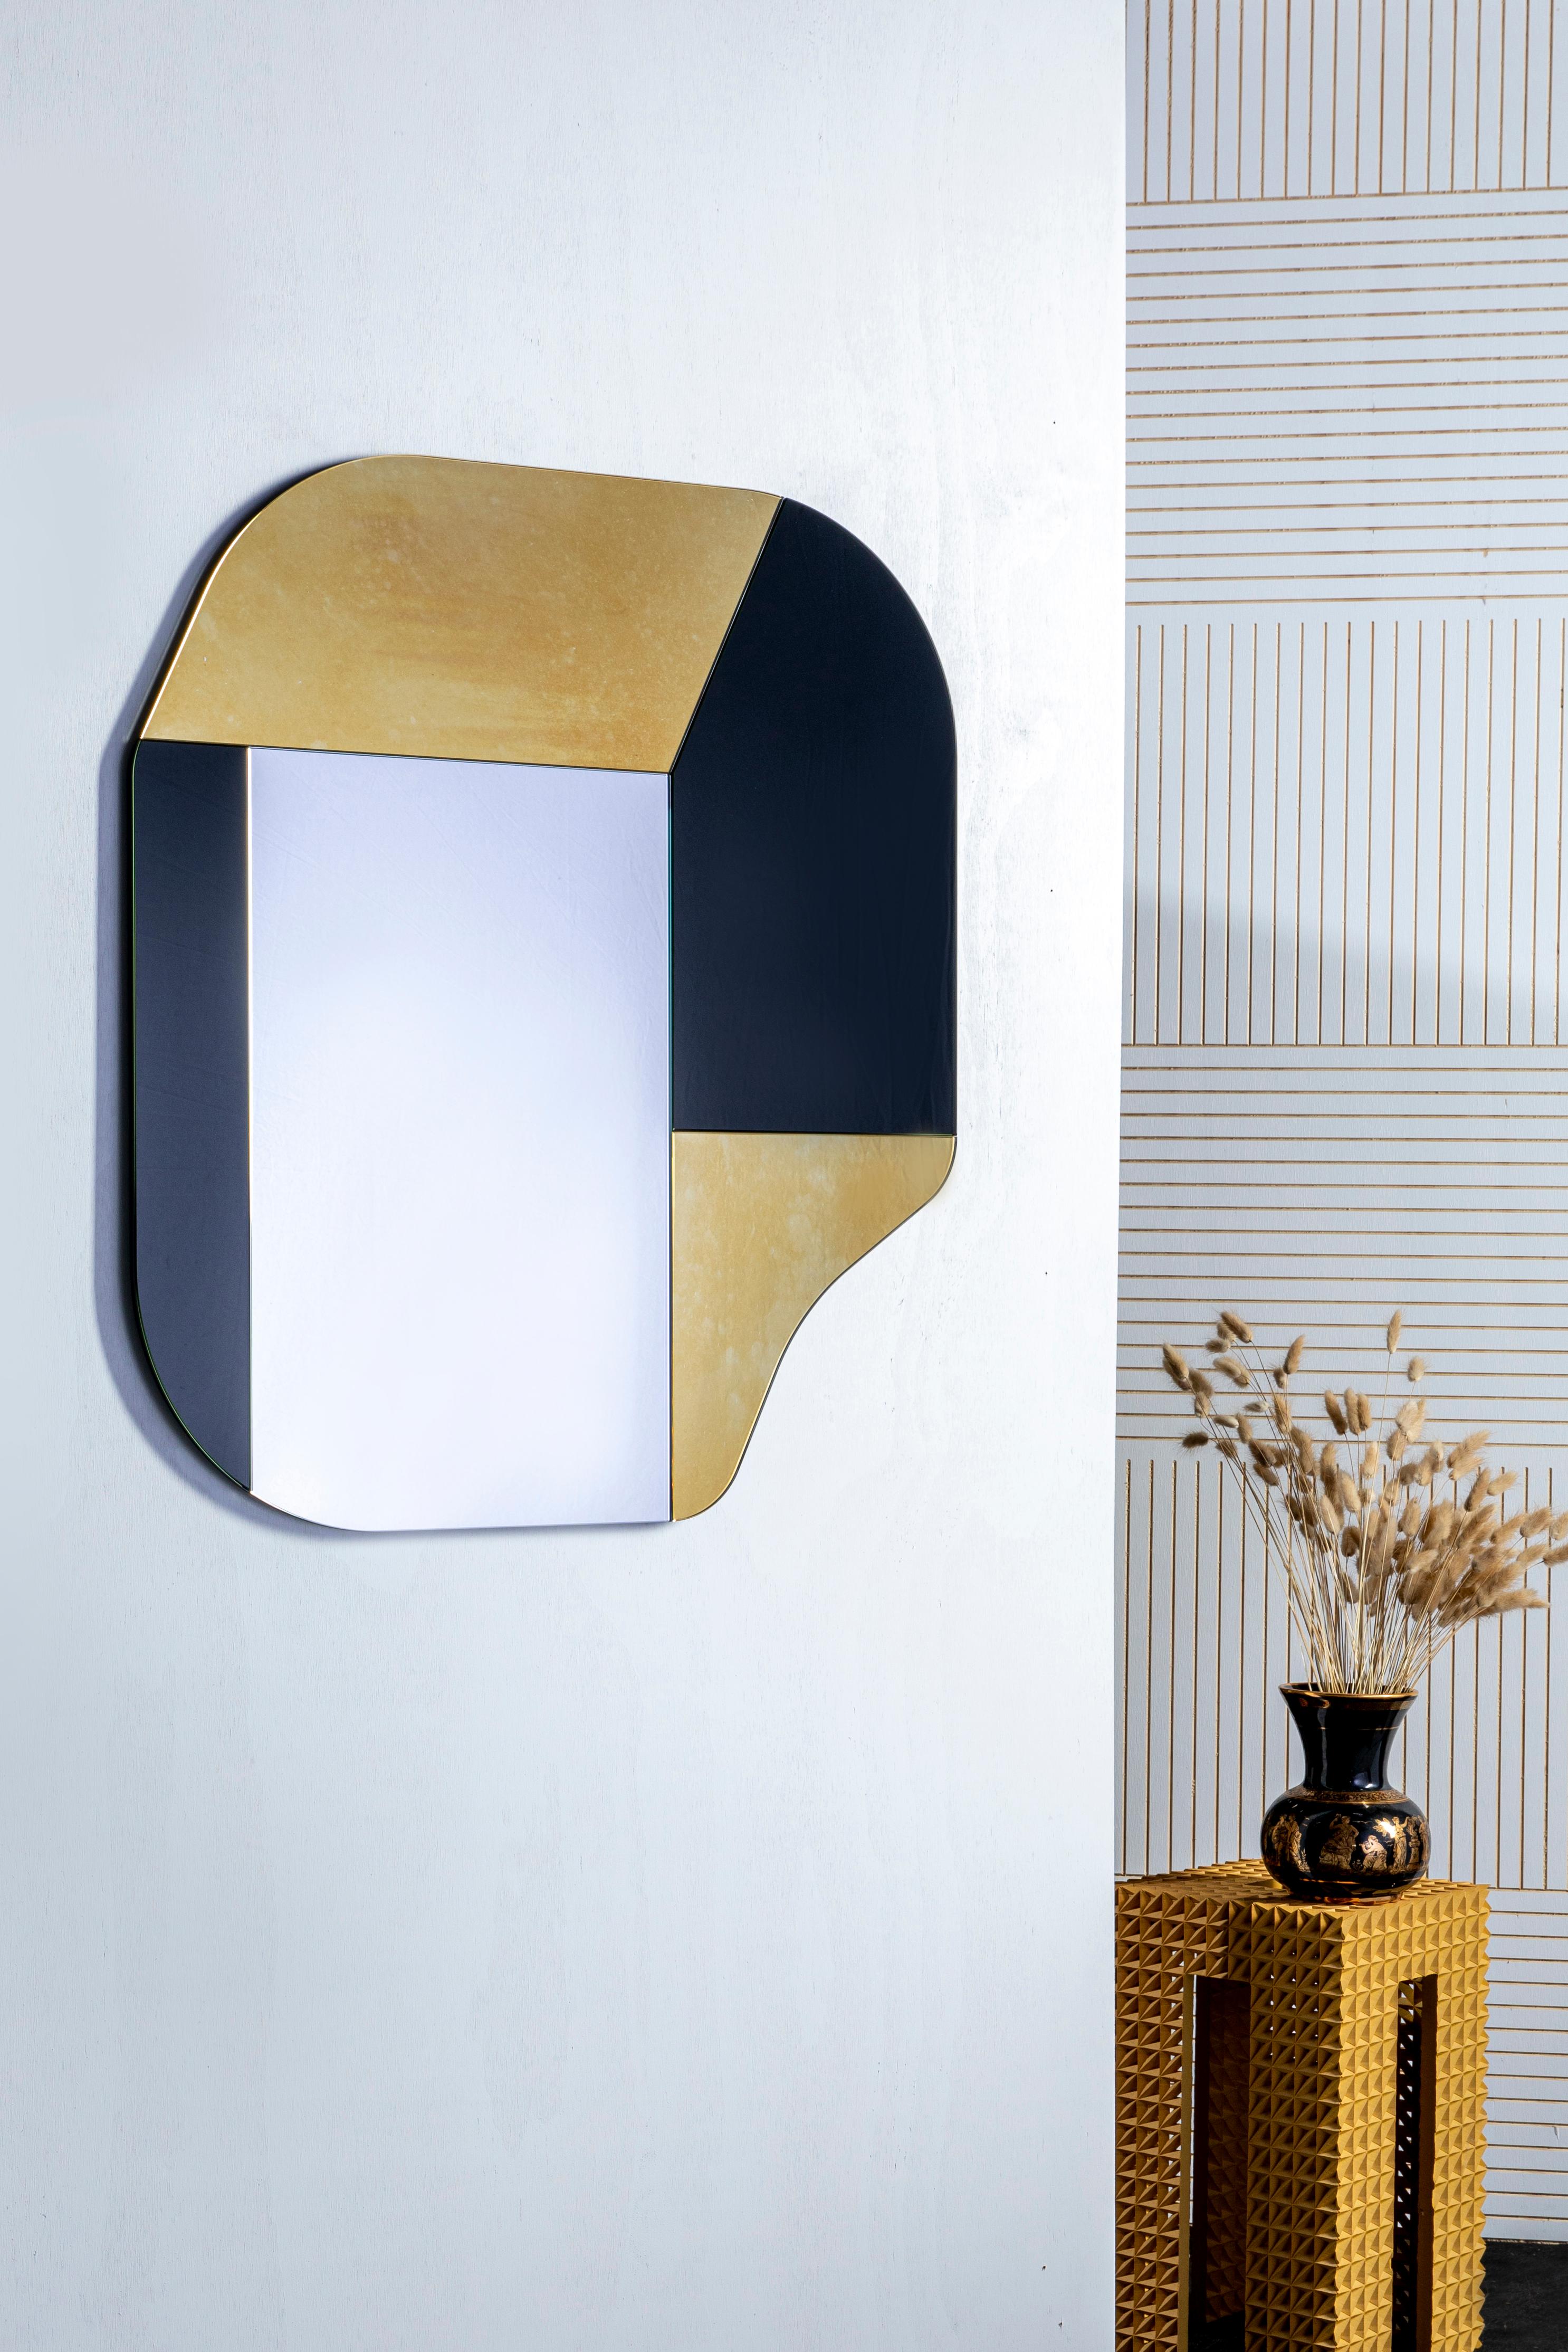 Mirrors are made with ultra clear, low-iron mirror
Backing is made from FSC Certified recycled paper and natural resin
Mirror tints hand-crafted in Italy
Dimension: 36 x 32 in
Weight: 39 lb
Lead time: 1-2 weeks
Paper template and hardware